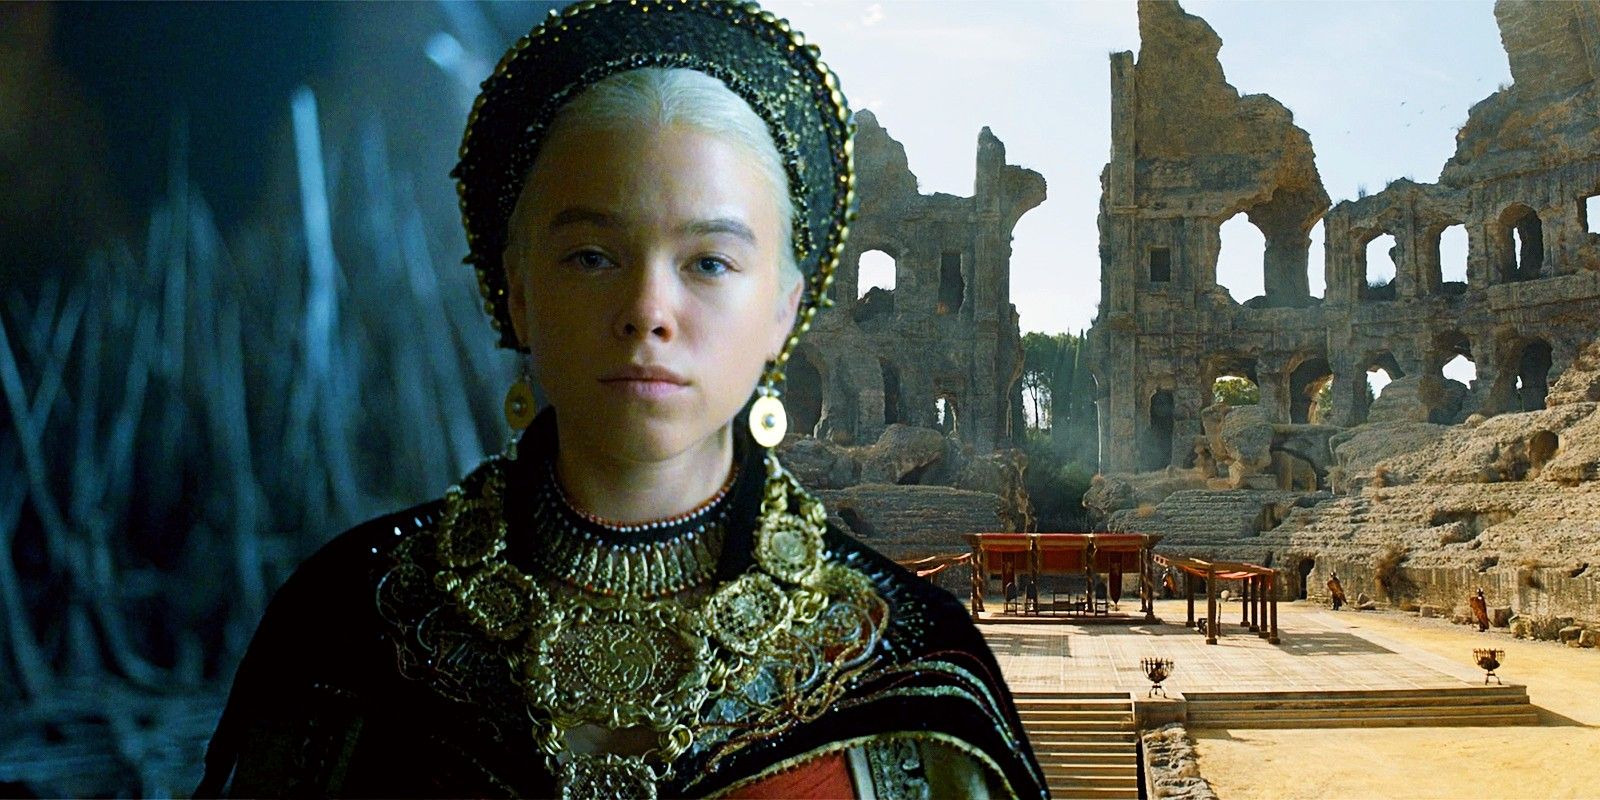 Milly Alcock as young Rhaenyra Targaryen in House of the Dragon with the Dragon Pit as seen in Game of Thrones season 7 episode 7